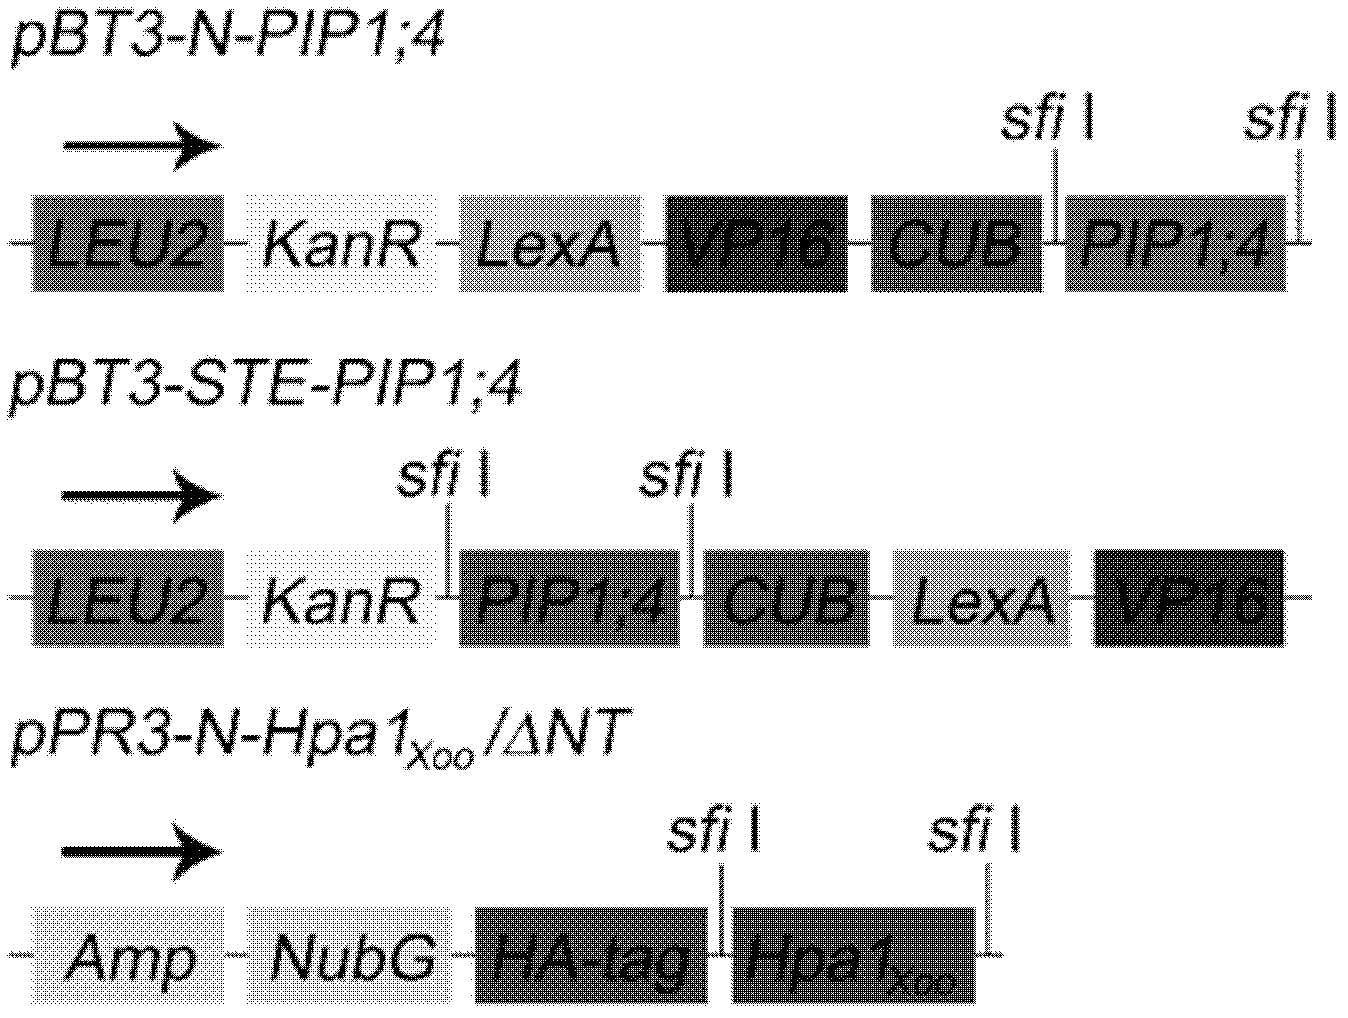 Application of aquaporin gene in construction of interaction carrier capable of interacting with Hpa1Xoo